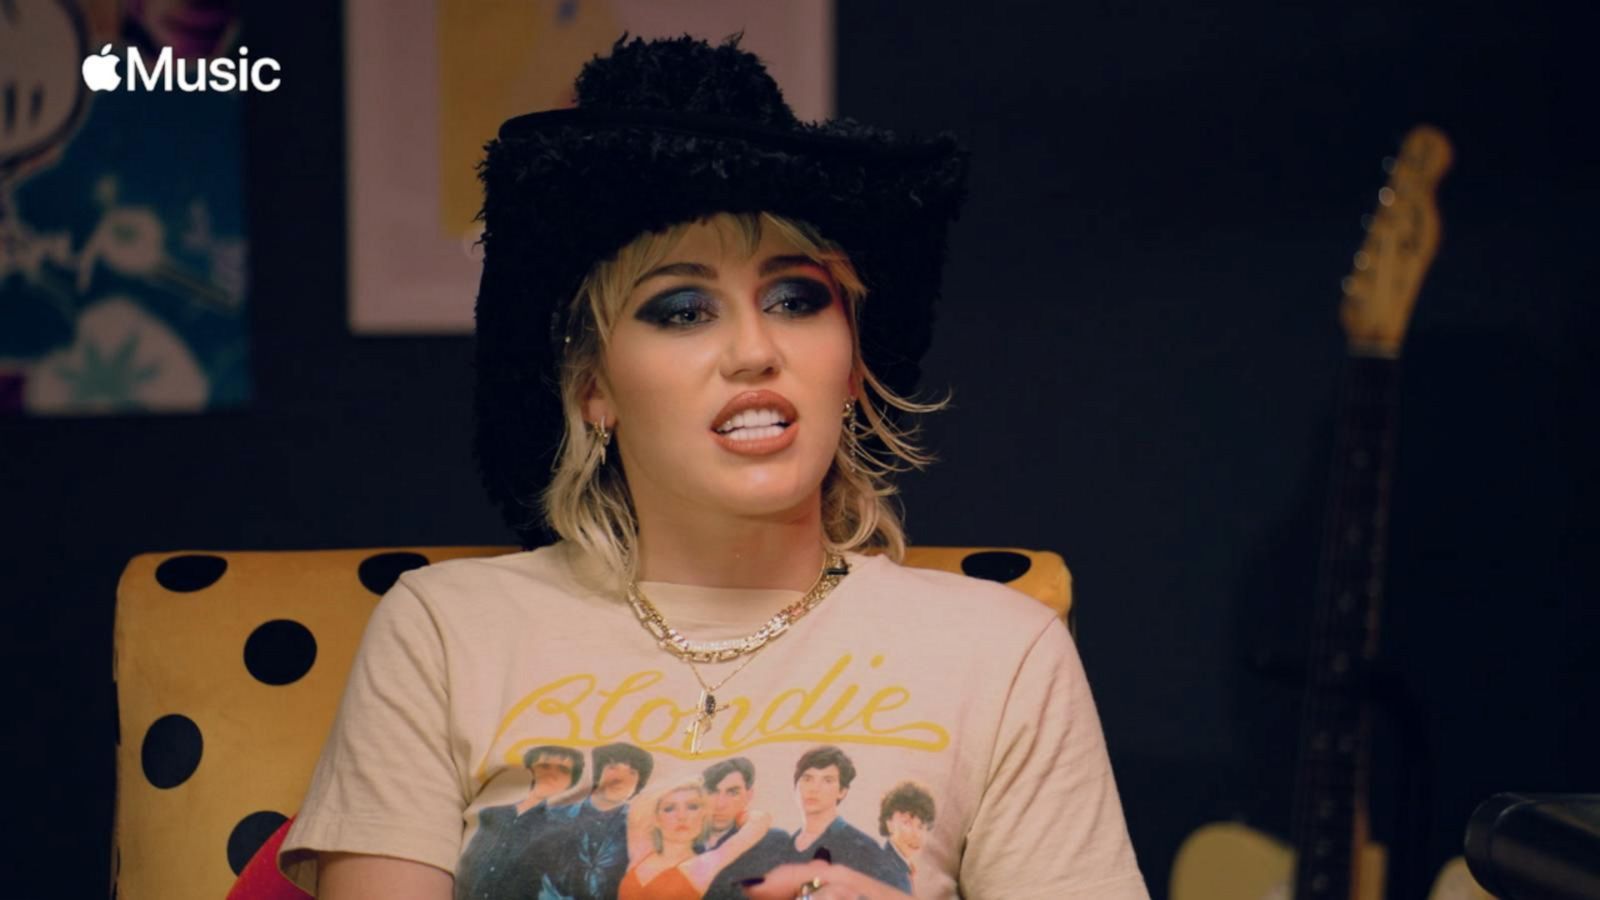 VIDEO: Miley Cyrus reveals she’s 2 weeks sober after pandemic relapse